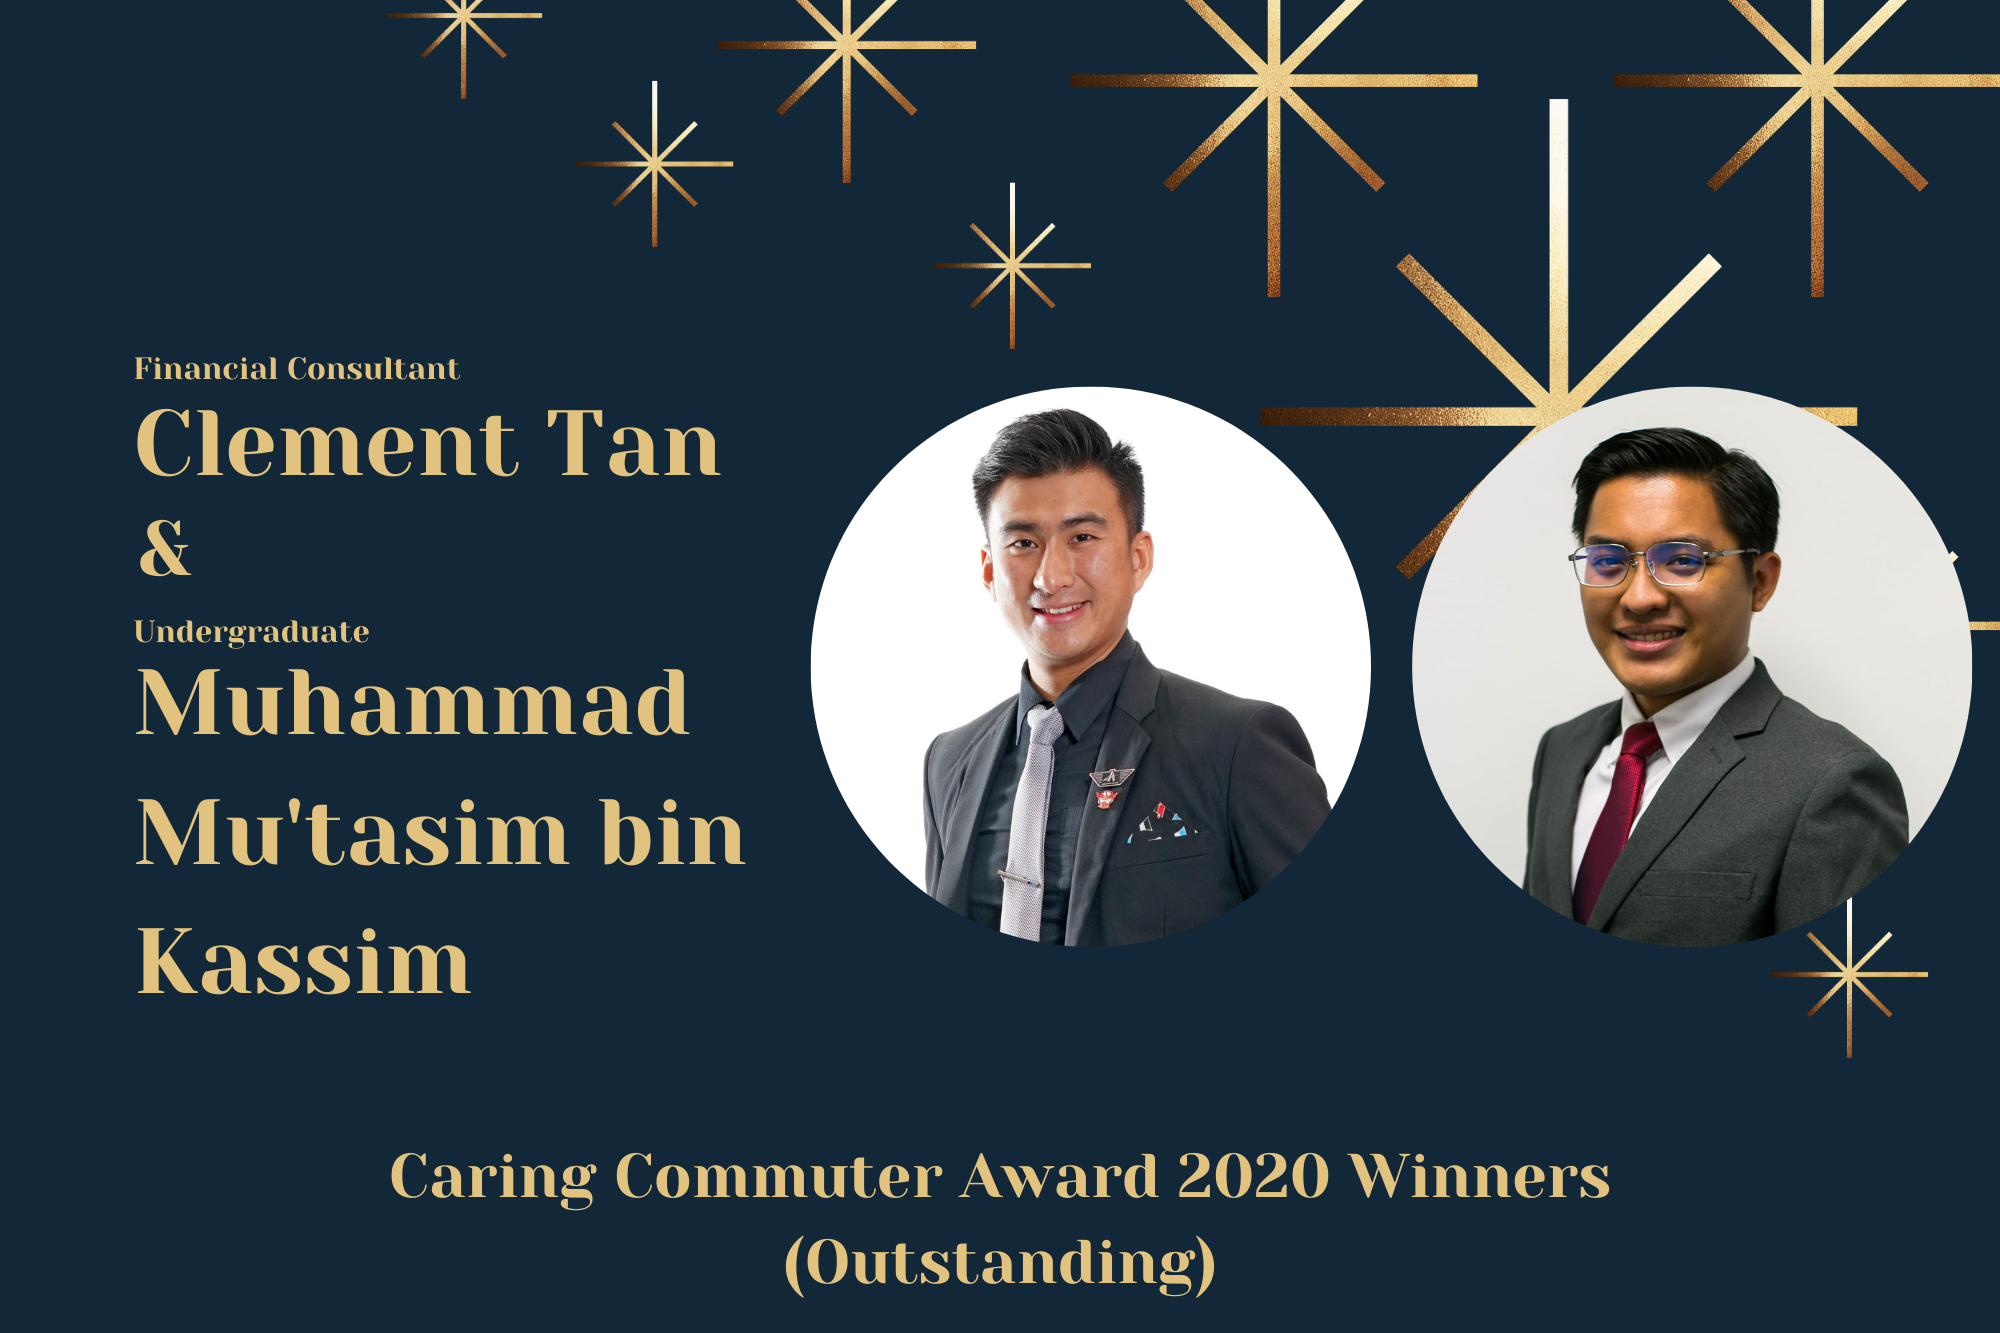 Meet Clement and Mu'tasim, A Financial Consultant and Undergraduate Pair, and Caring Commuter Award 2020 Outstanding Winners